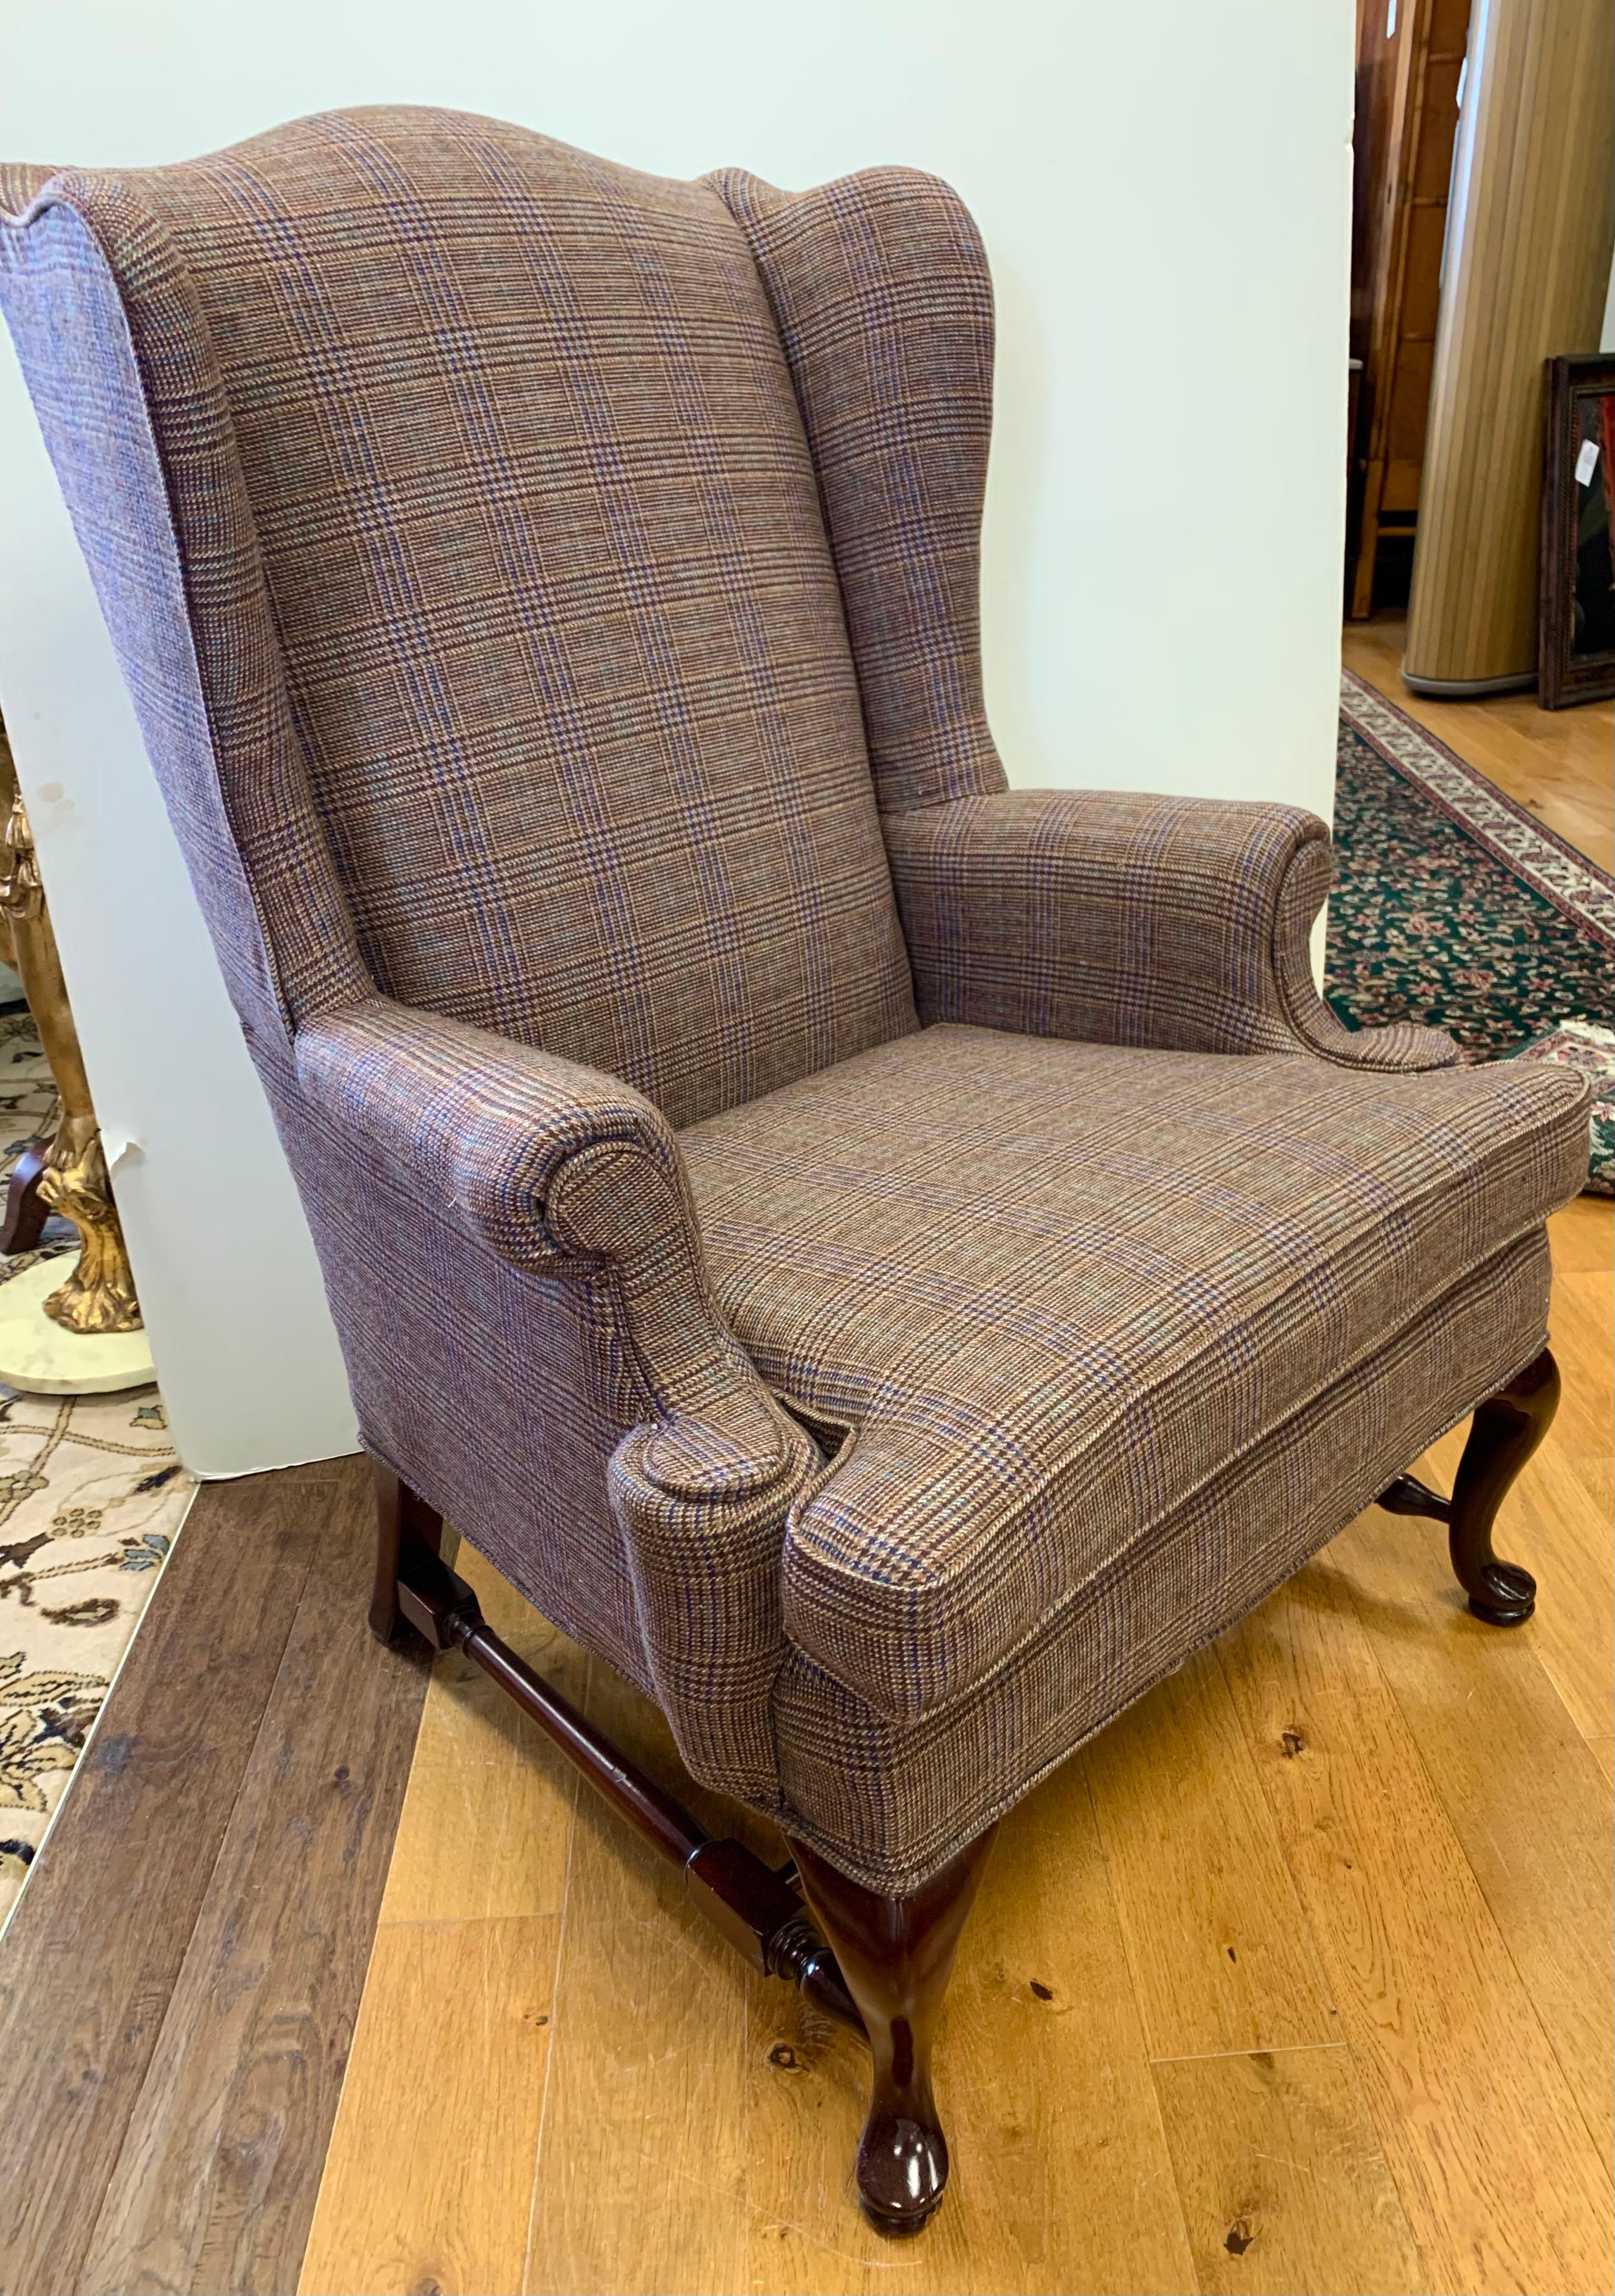 Handsome Classic wingback chair with mahogany legs and cross stretcher has been newly reupholstered in a luxurious Ralph Lauren tartan wool plaid fabric. The tartan plaid fabric melds perfectly with the dark, rich mahogany feet. Arms have removable